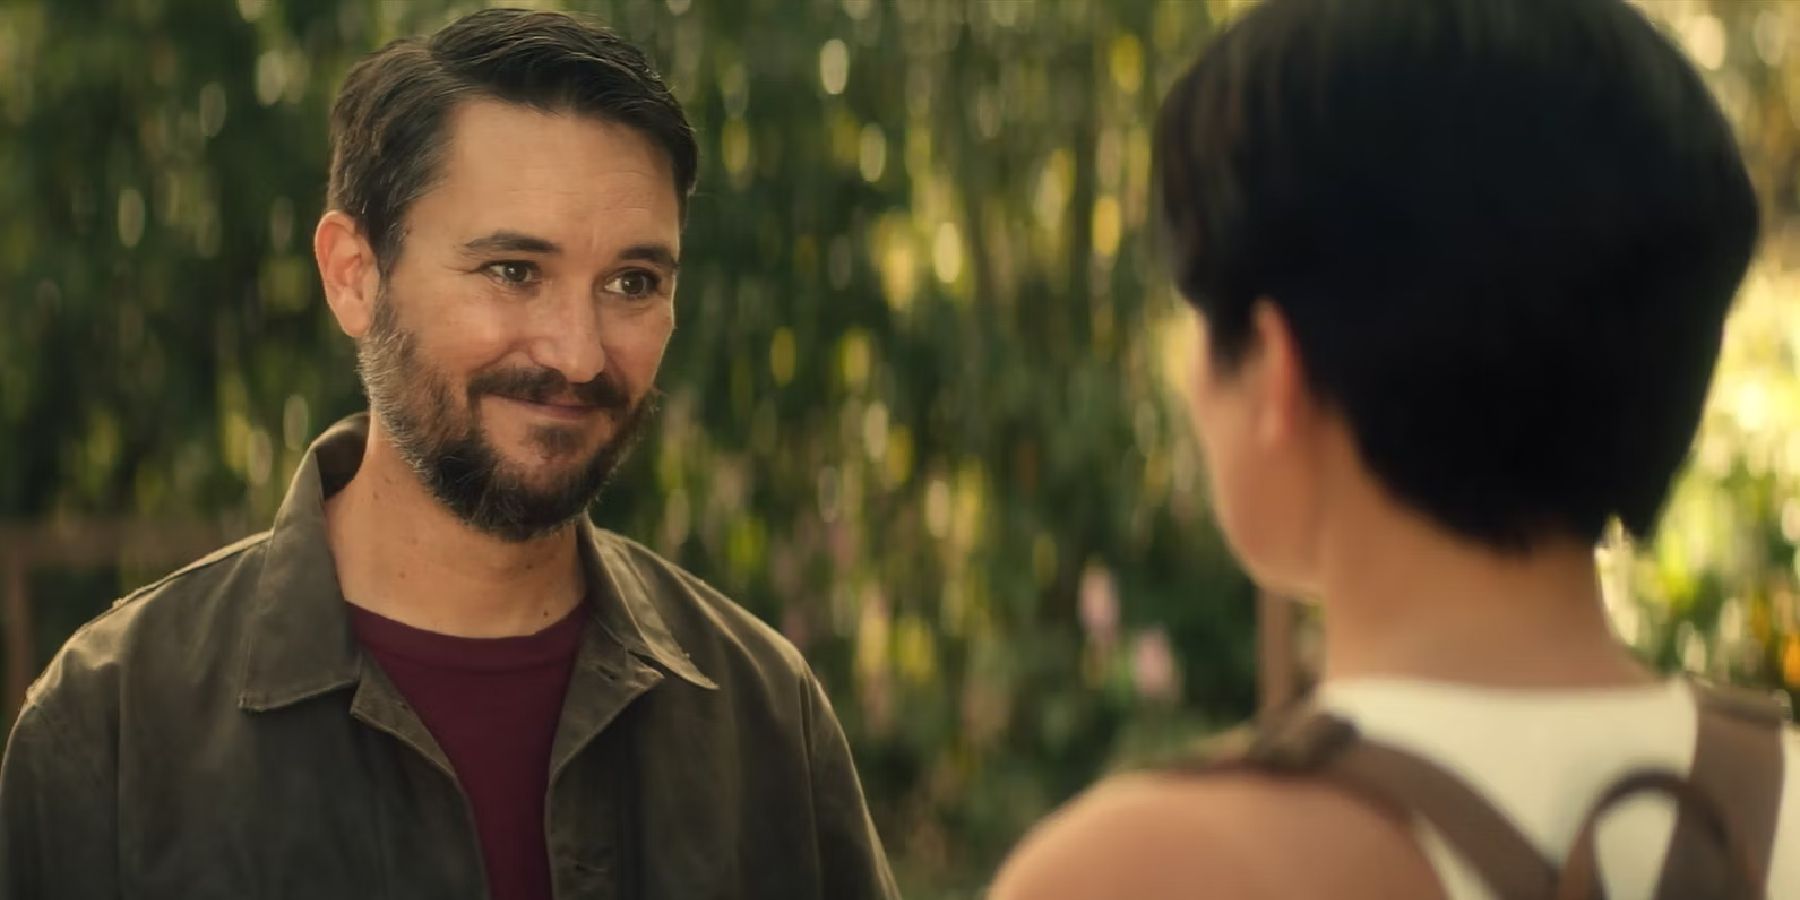 Wil Wheaton as Wesley Crusher in Picard